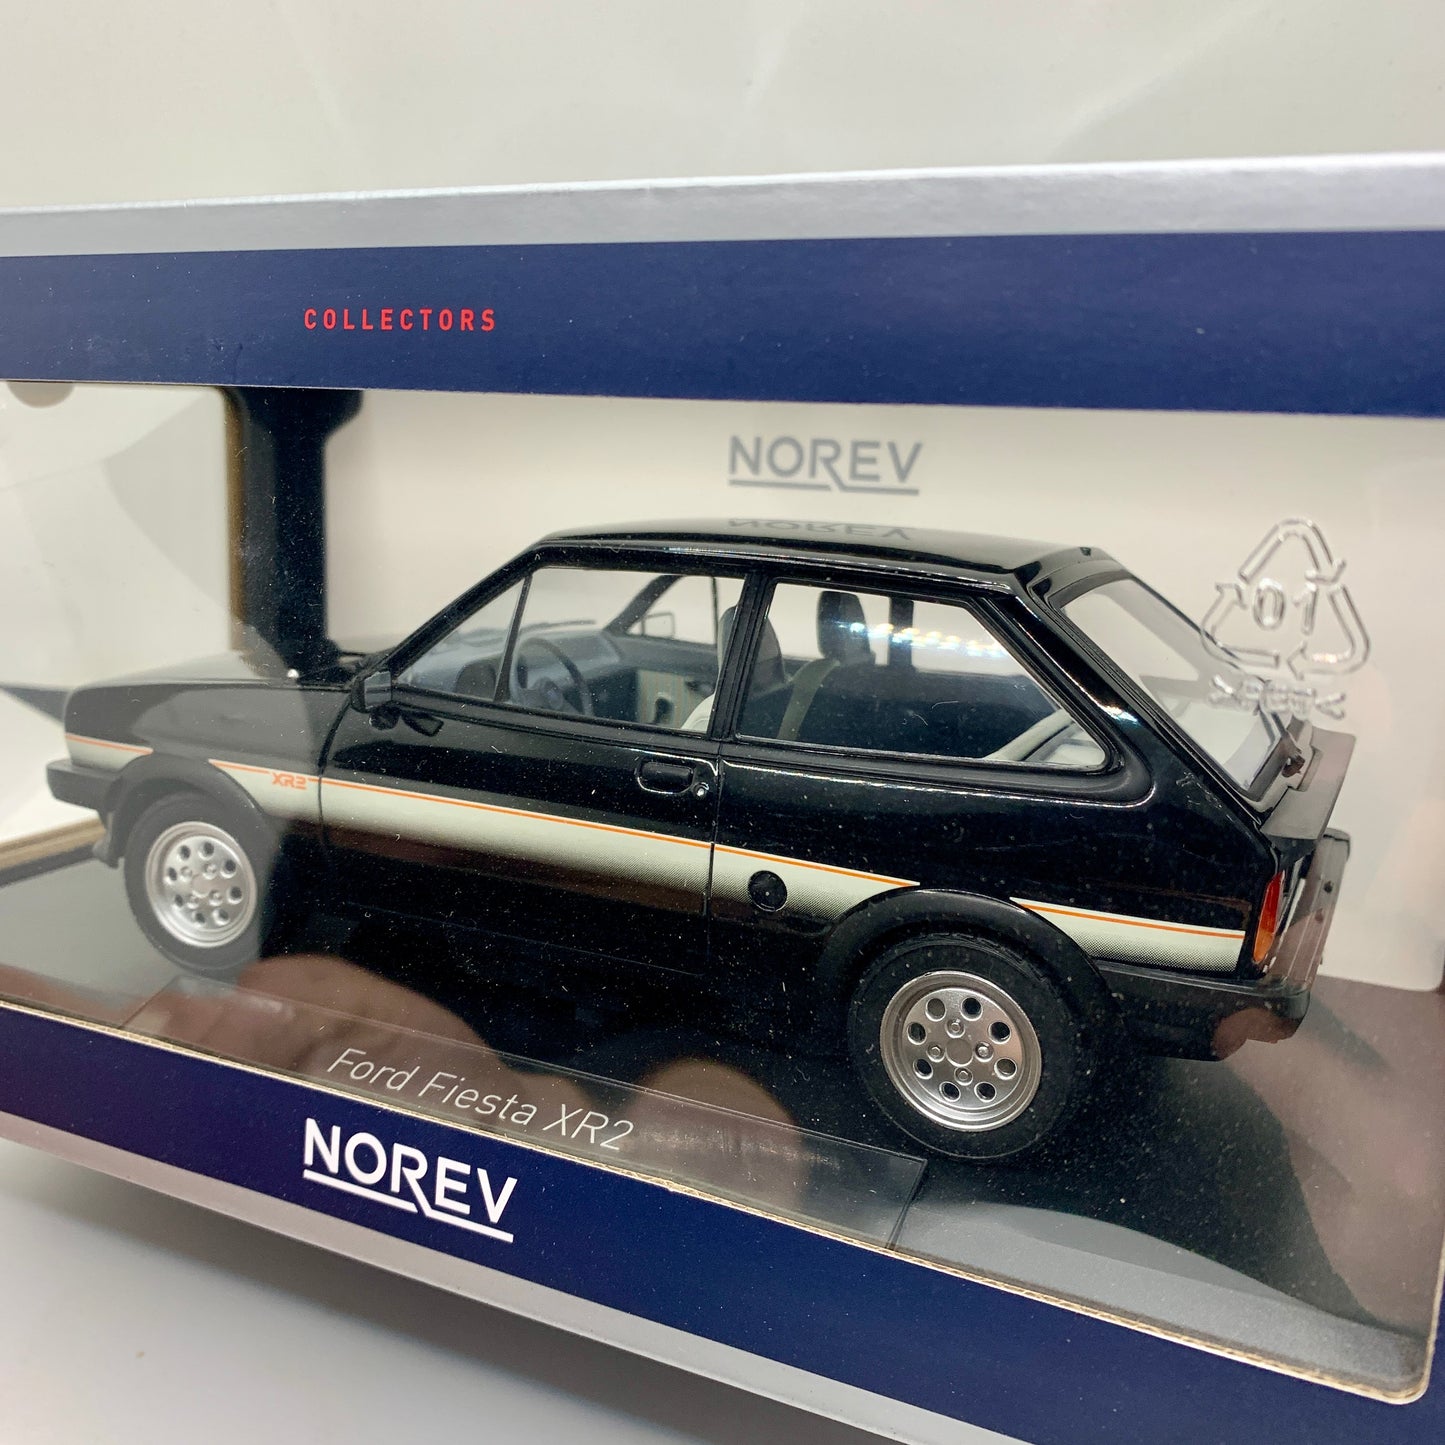 Ford Fiesta XR2 Collectable Cars 1/18 Scale